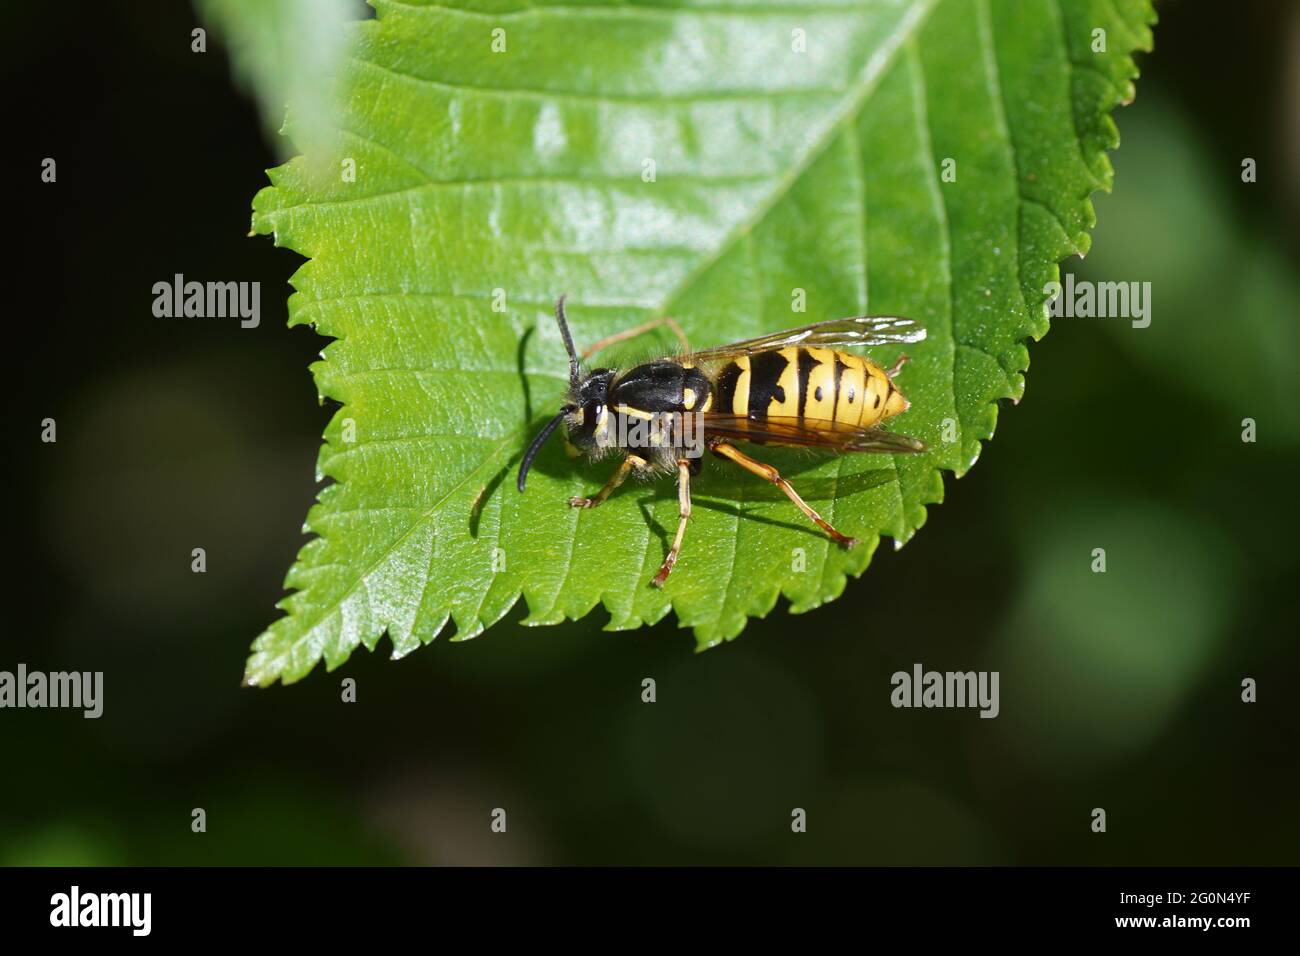 Queen of a common wasp (Vespula vulgaris) of the family Vespidae in spring on a leaf of an elm. Dutch garden, spring, Netherlands. Stock Photo